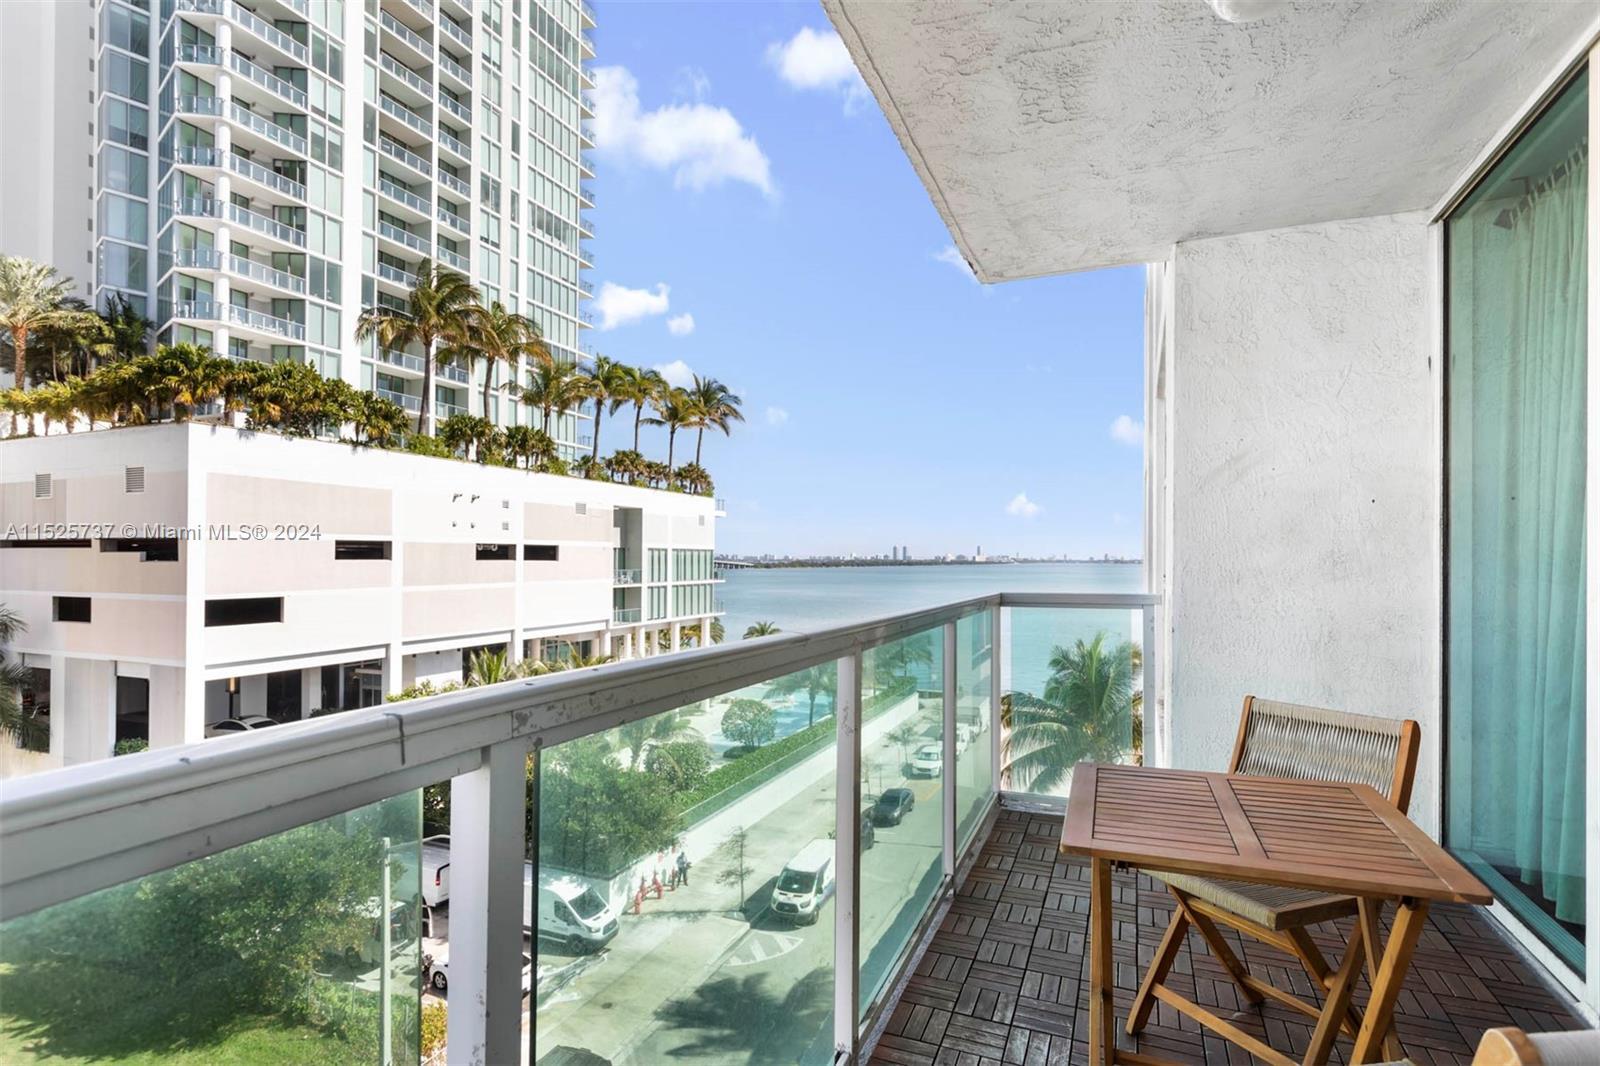 Indulge in luxury with this stunning 1-bed, 1-bath residence featuring breathtaking bay views, a spa